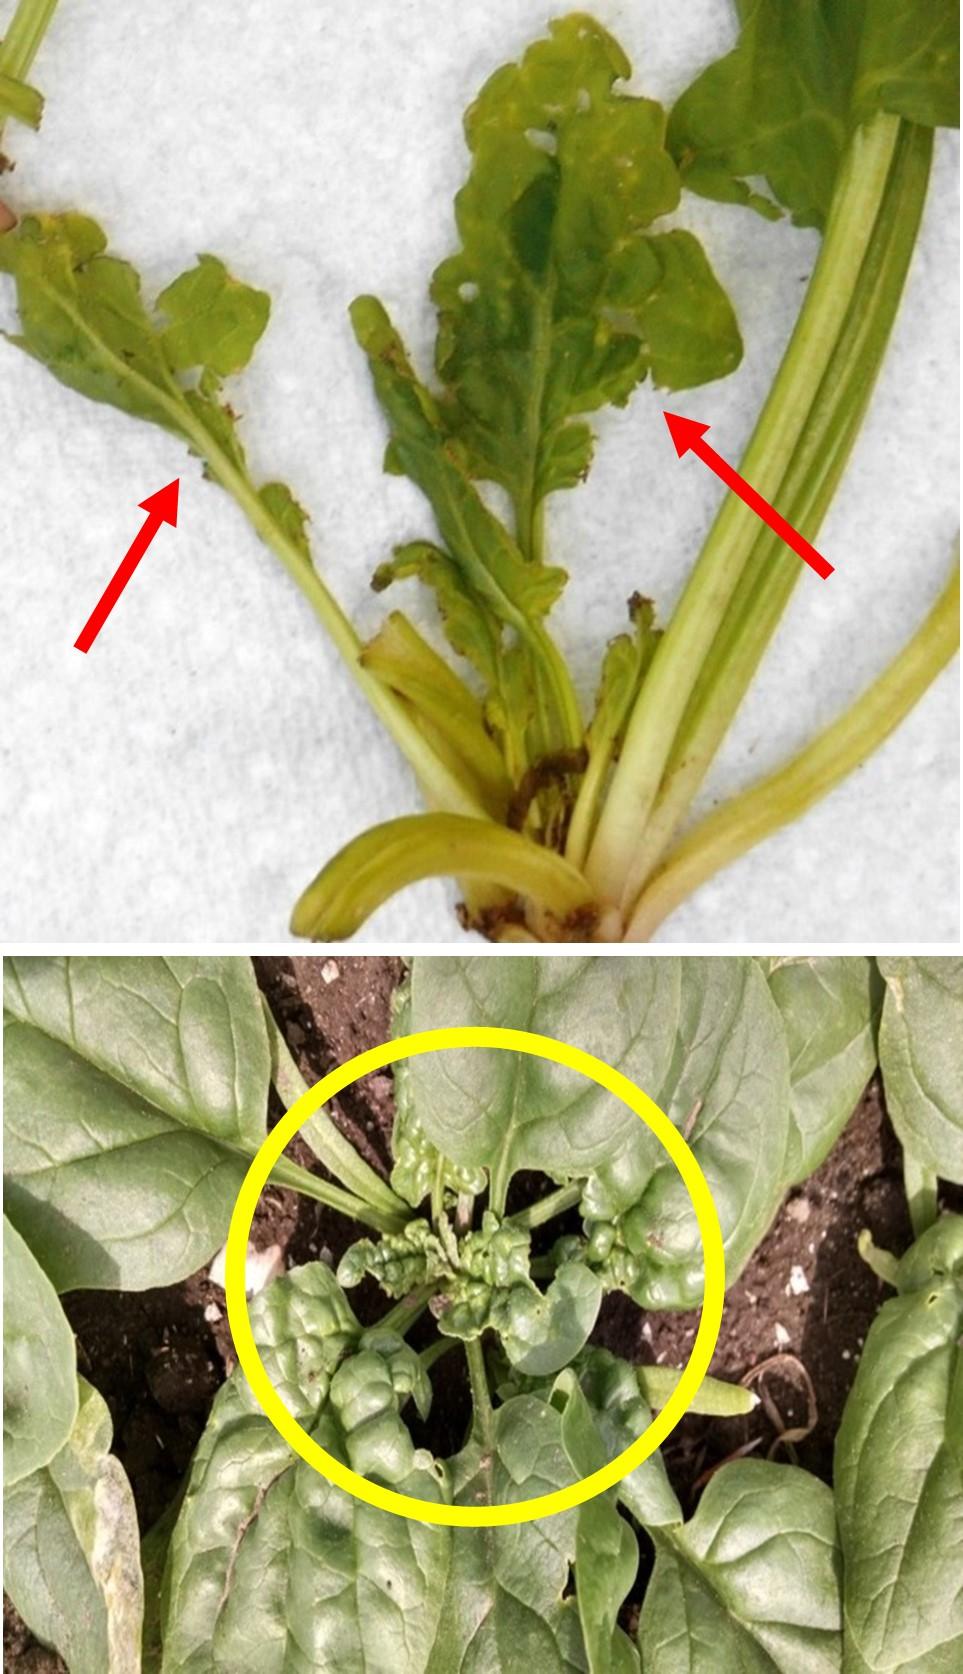 Spinach Crown Mite damage on leaves